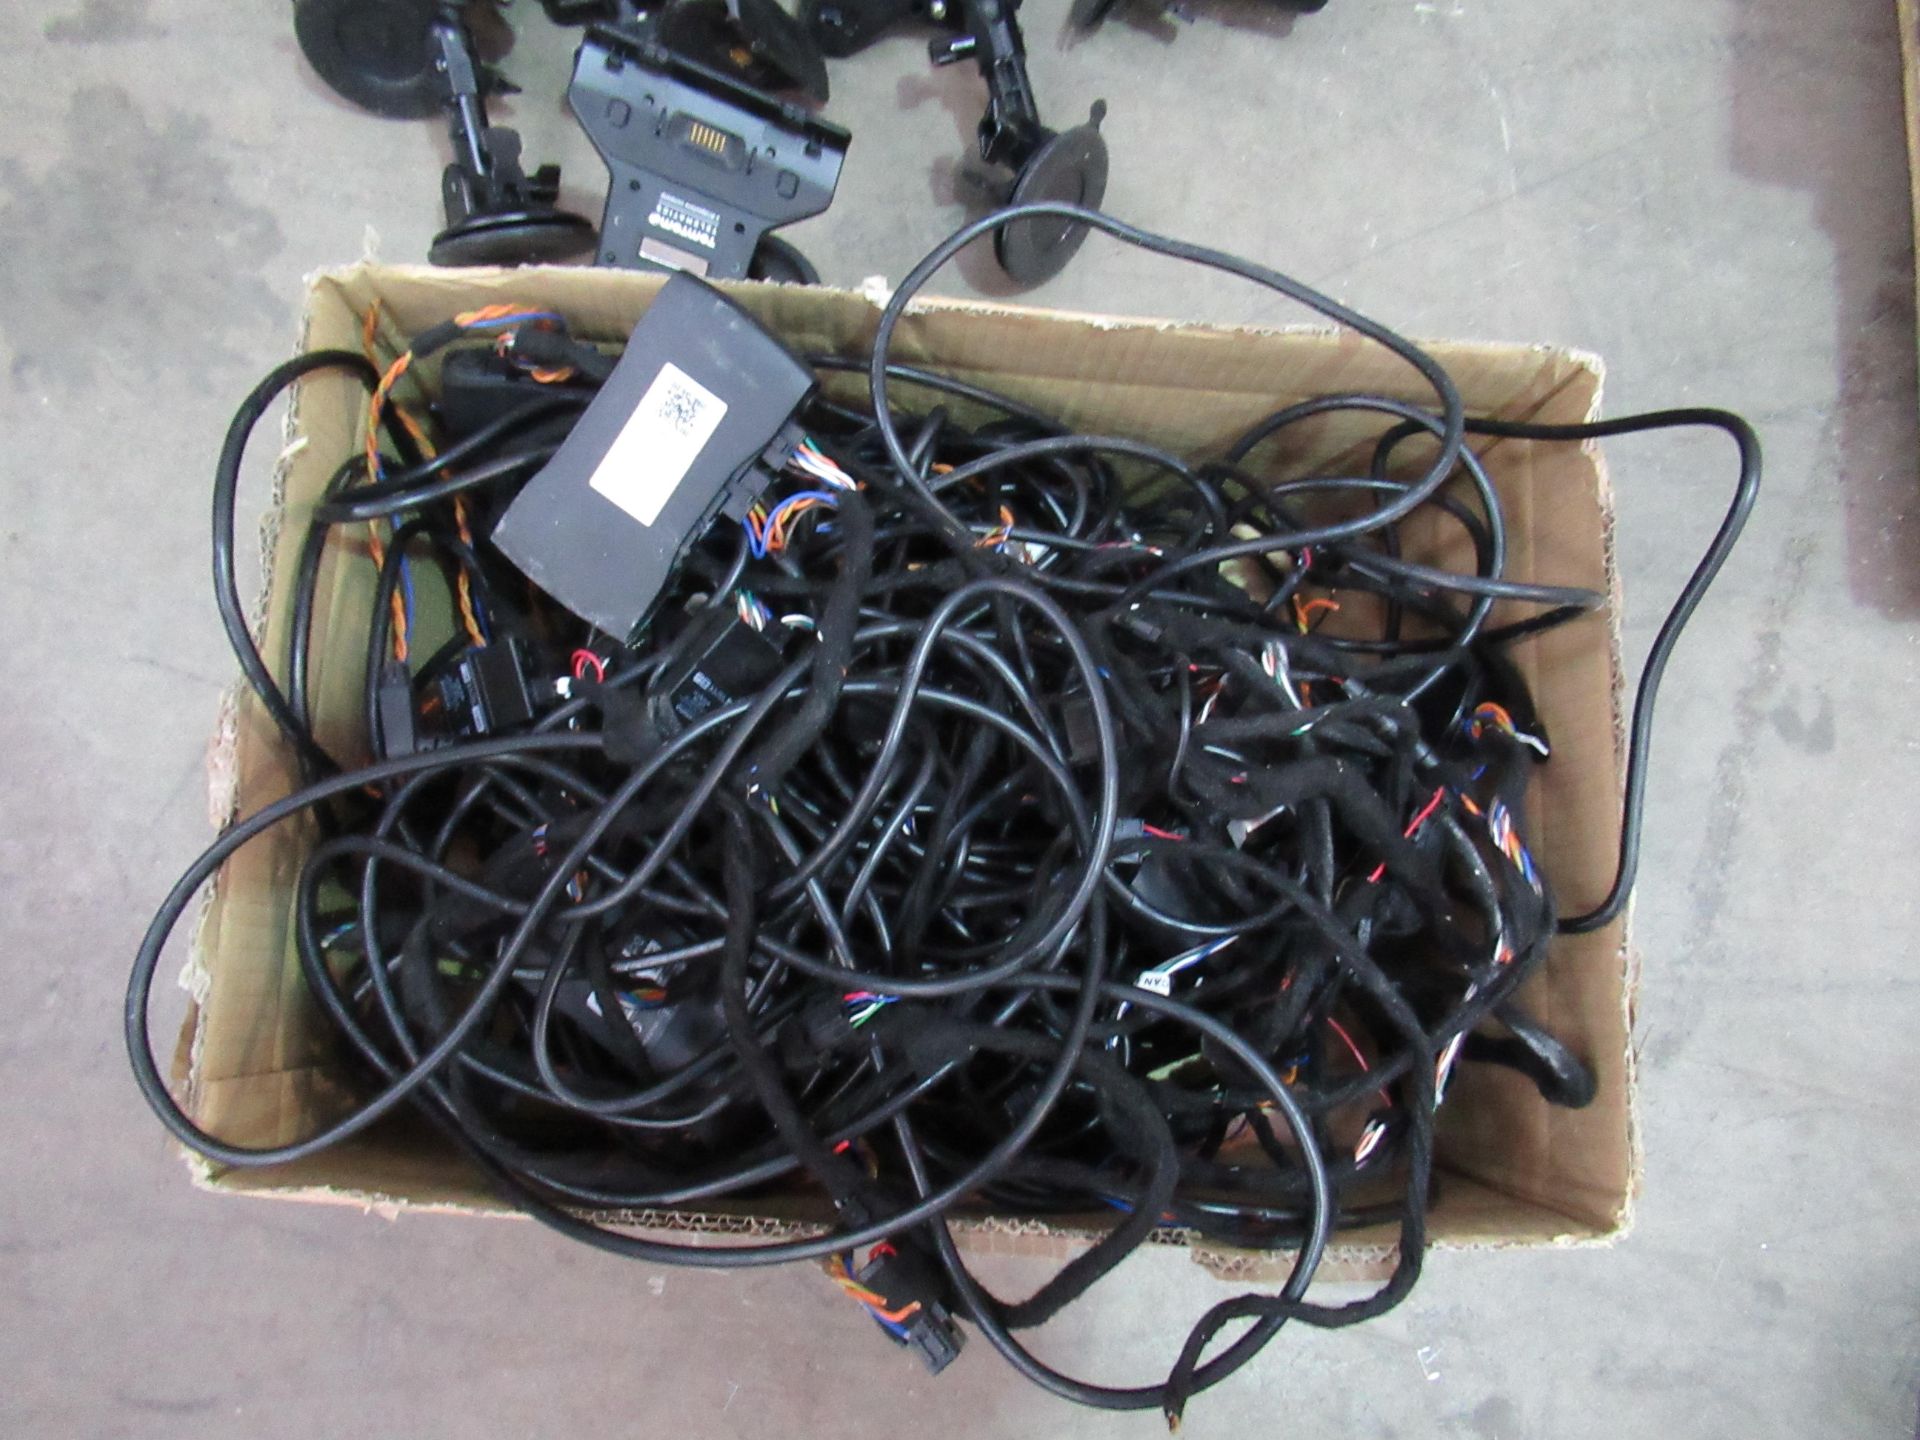 13x TomTom telematics sat-navs with assorted cables and harnesses - Image 5 of 6